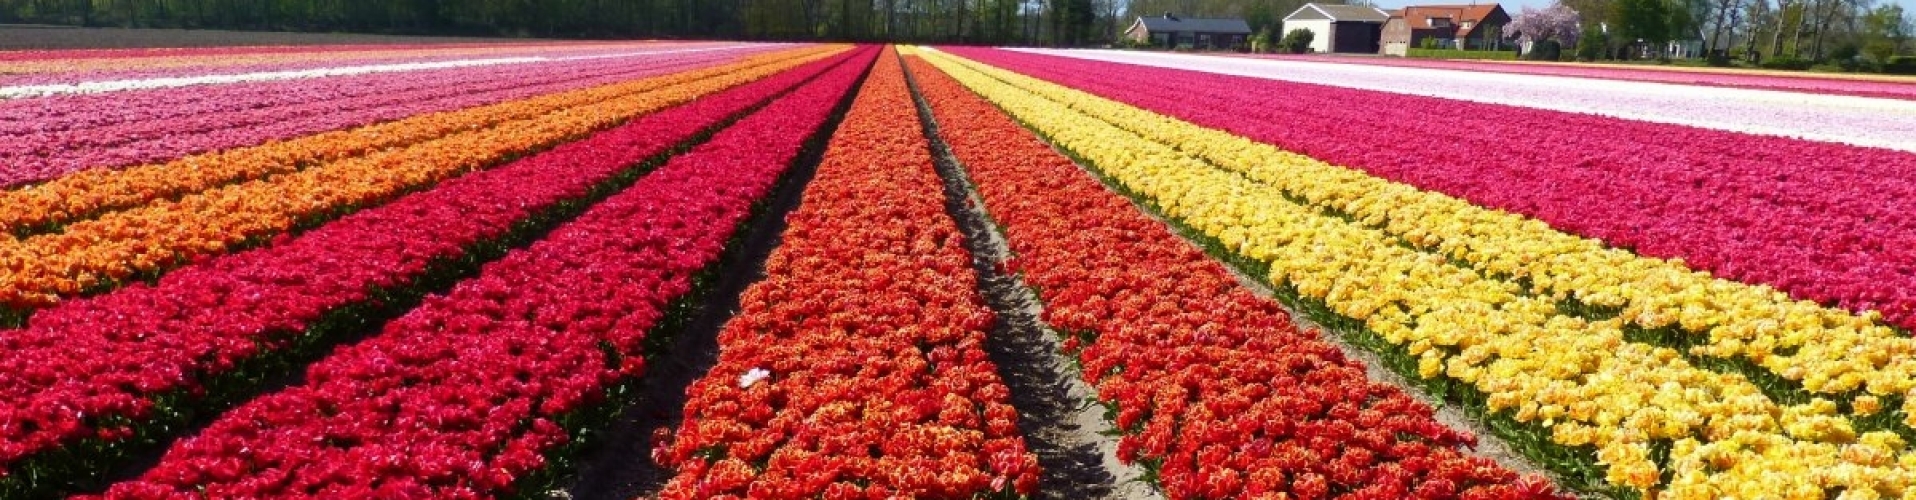 Fields of double flowering Tulips in various colors in Holland